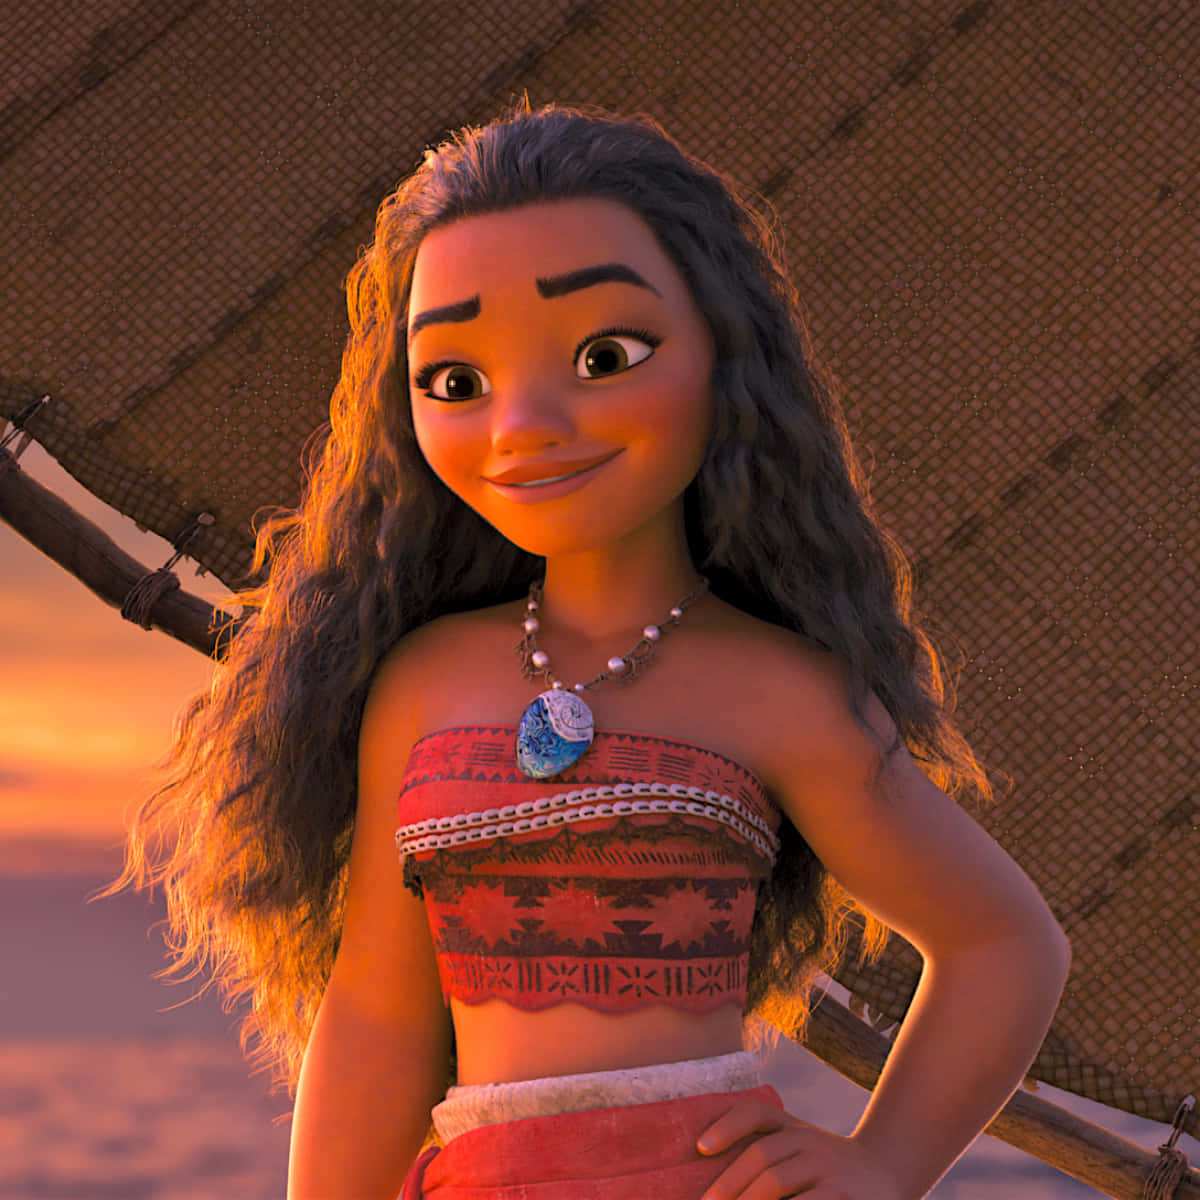 Live your own adventure with Moana